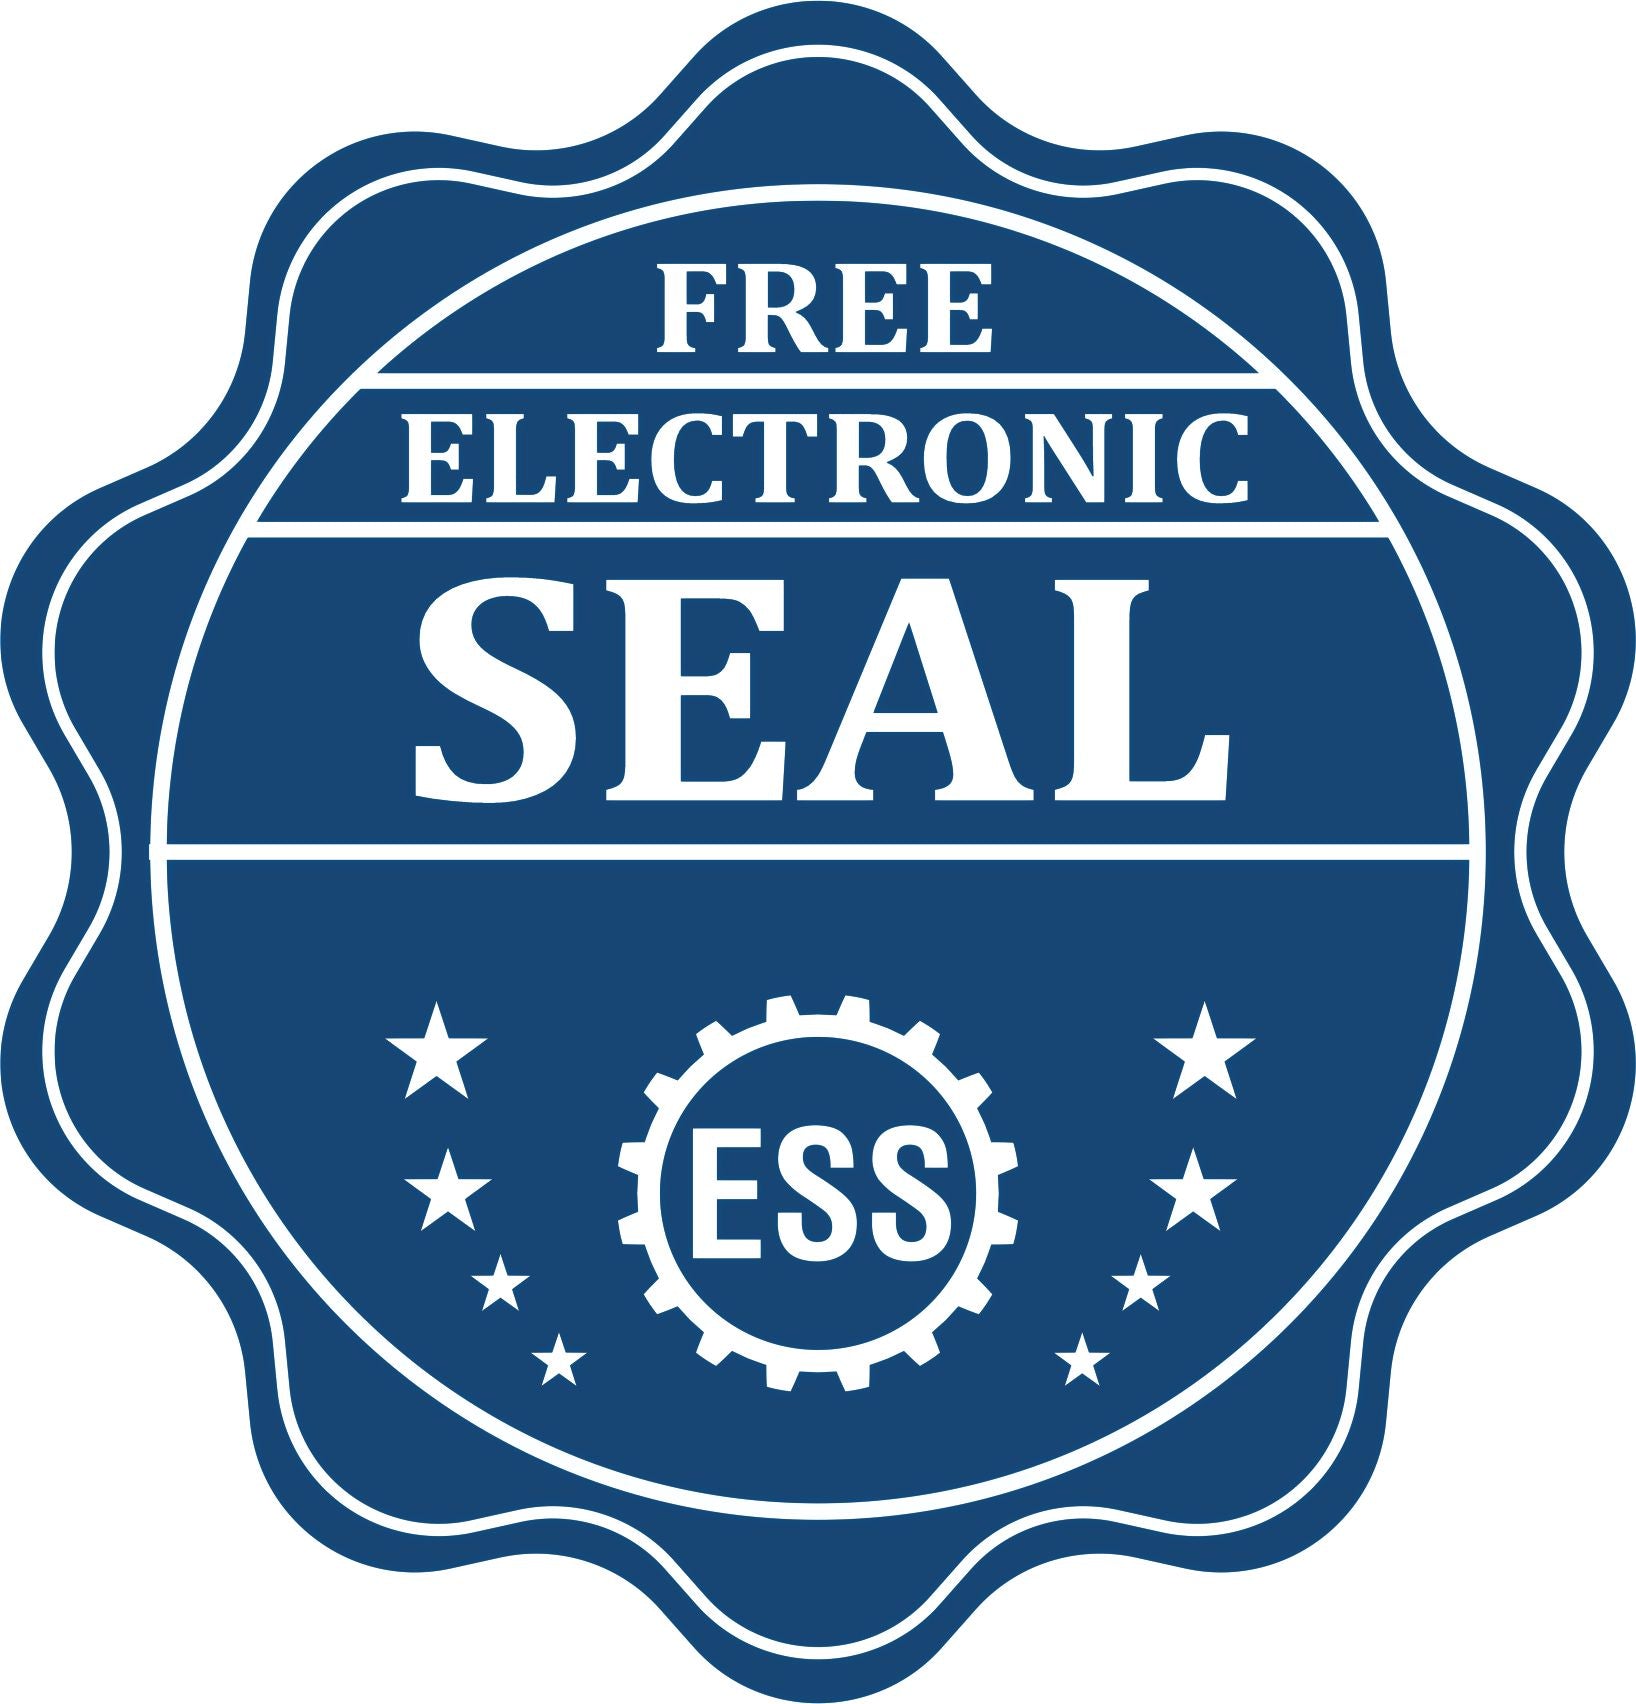 A badge showing a free electronic seal for the Long Reach Oregon PE Seal with stars and the ESS gear on the emblem.